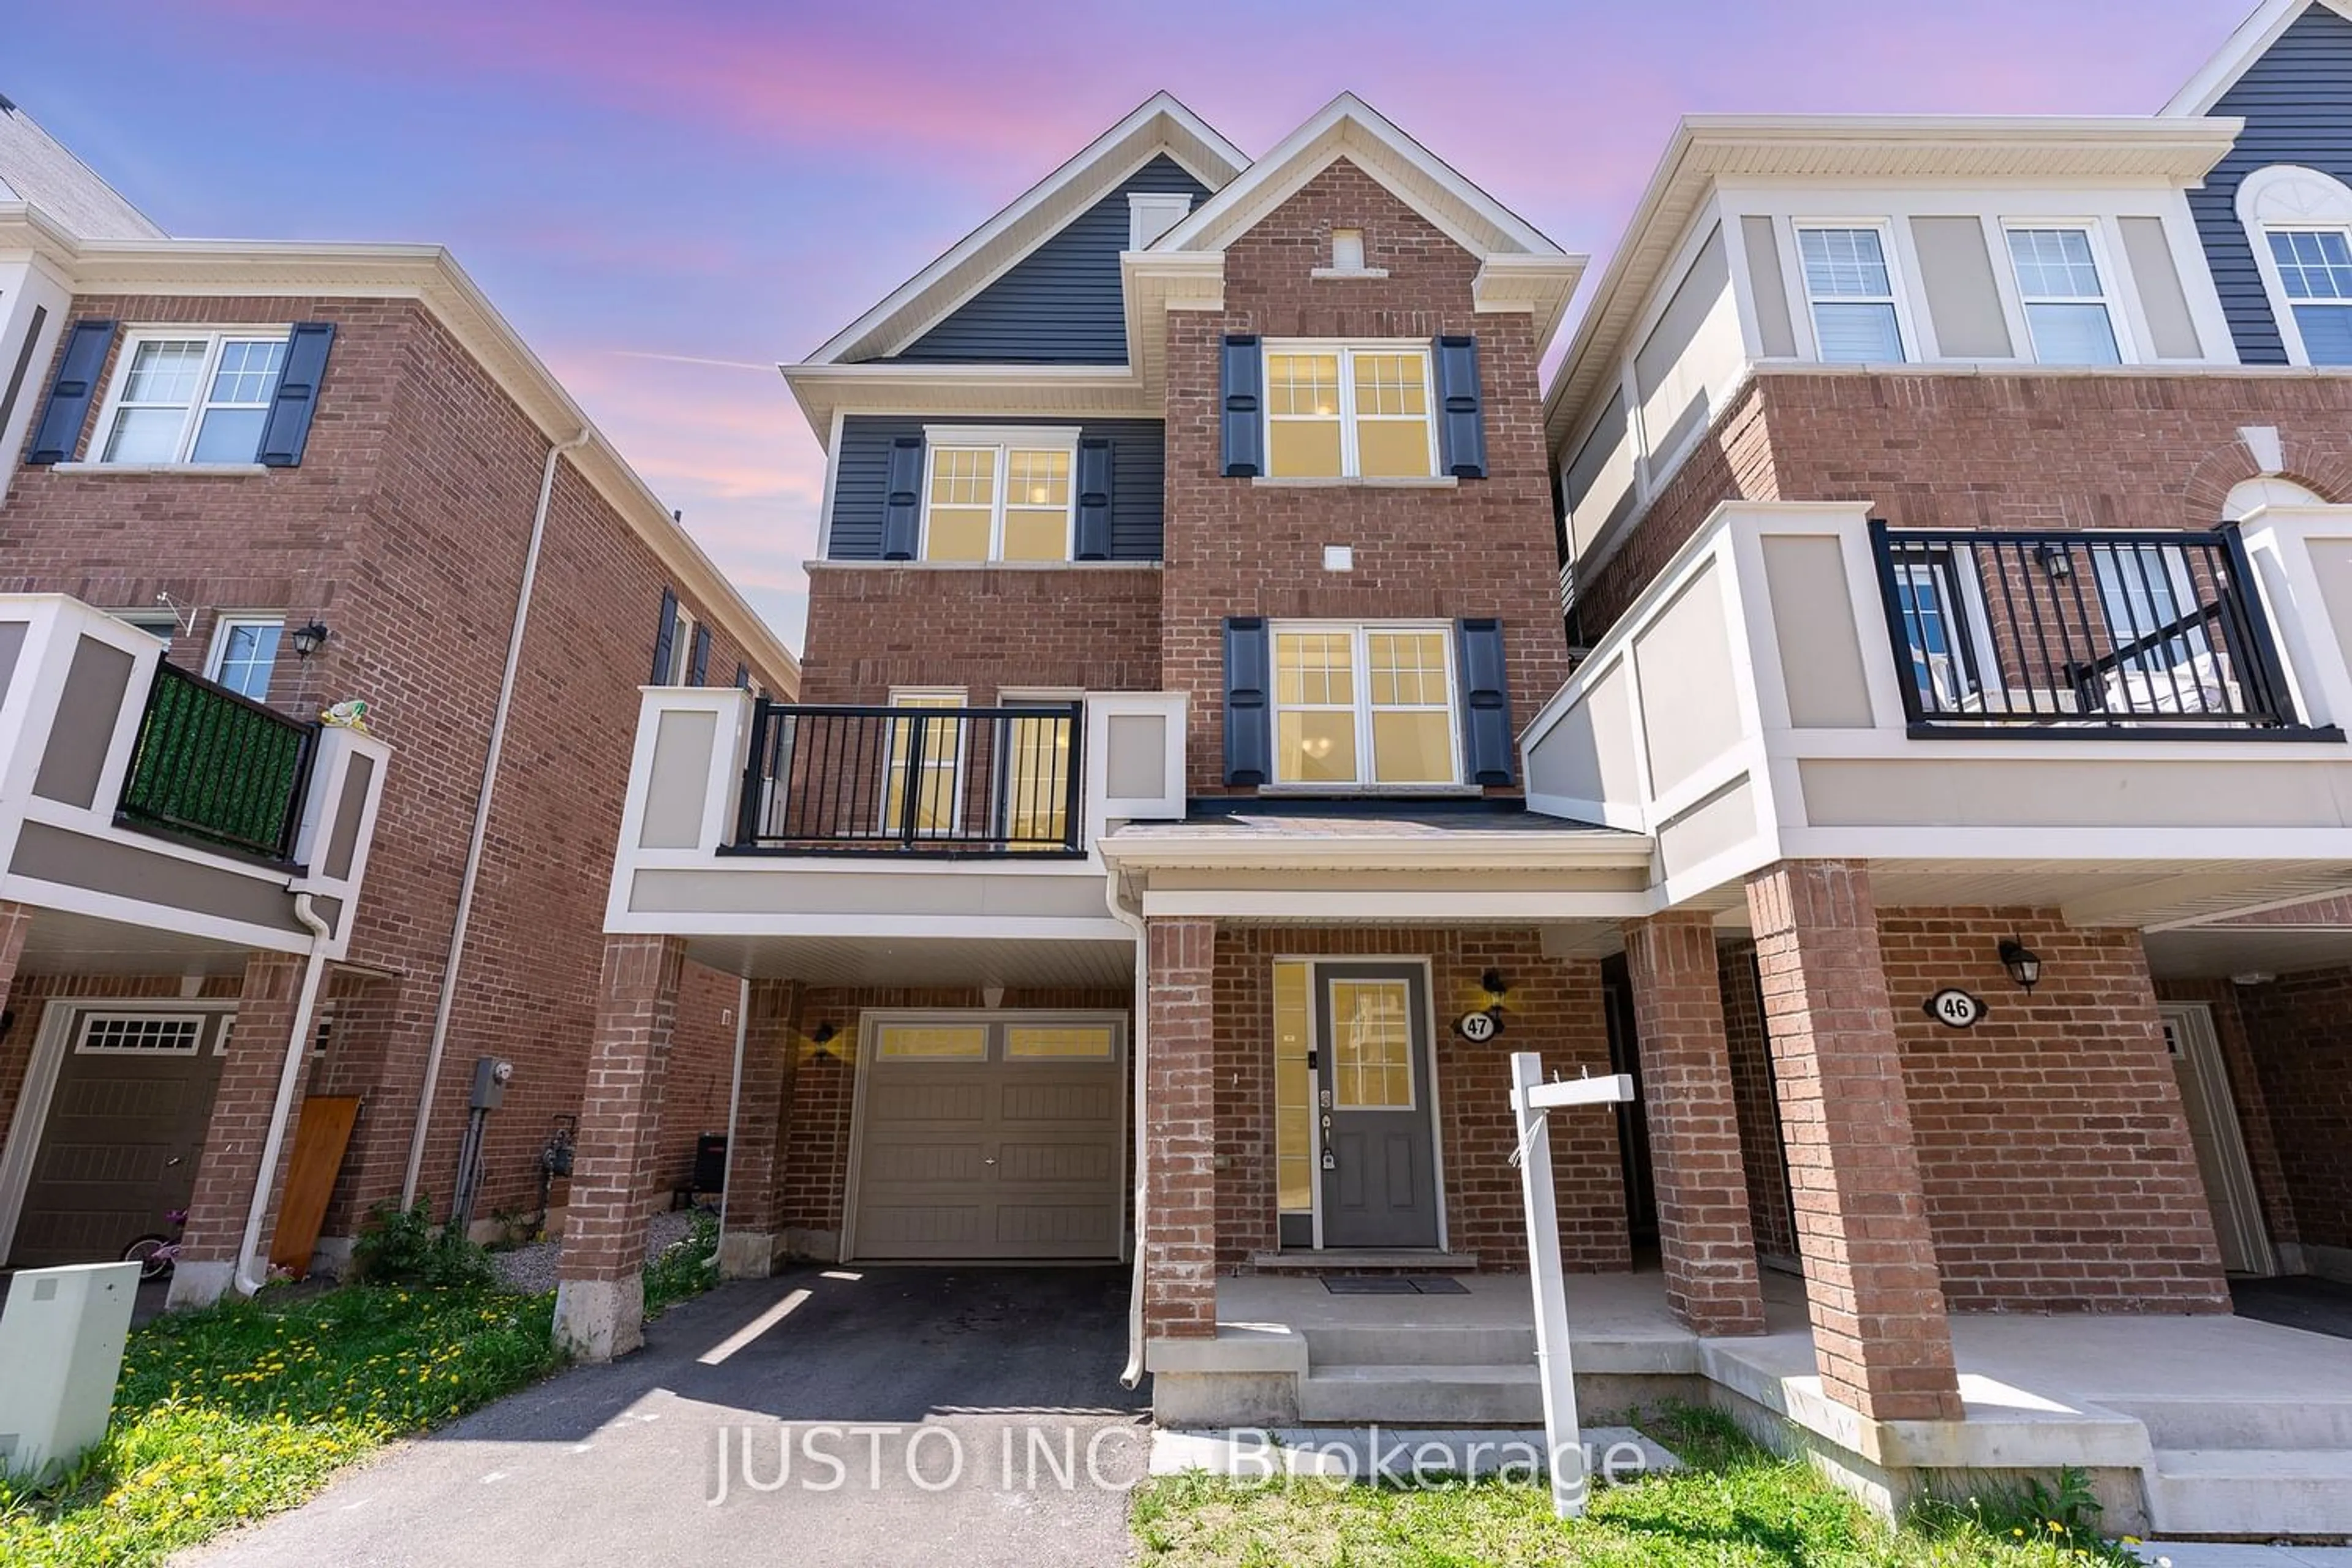 Home with brick exterior material for 1000 Asleton Blvd #47, Milton Ontario L9T 9L5